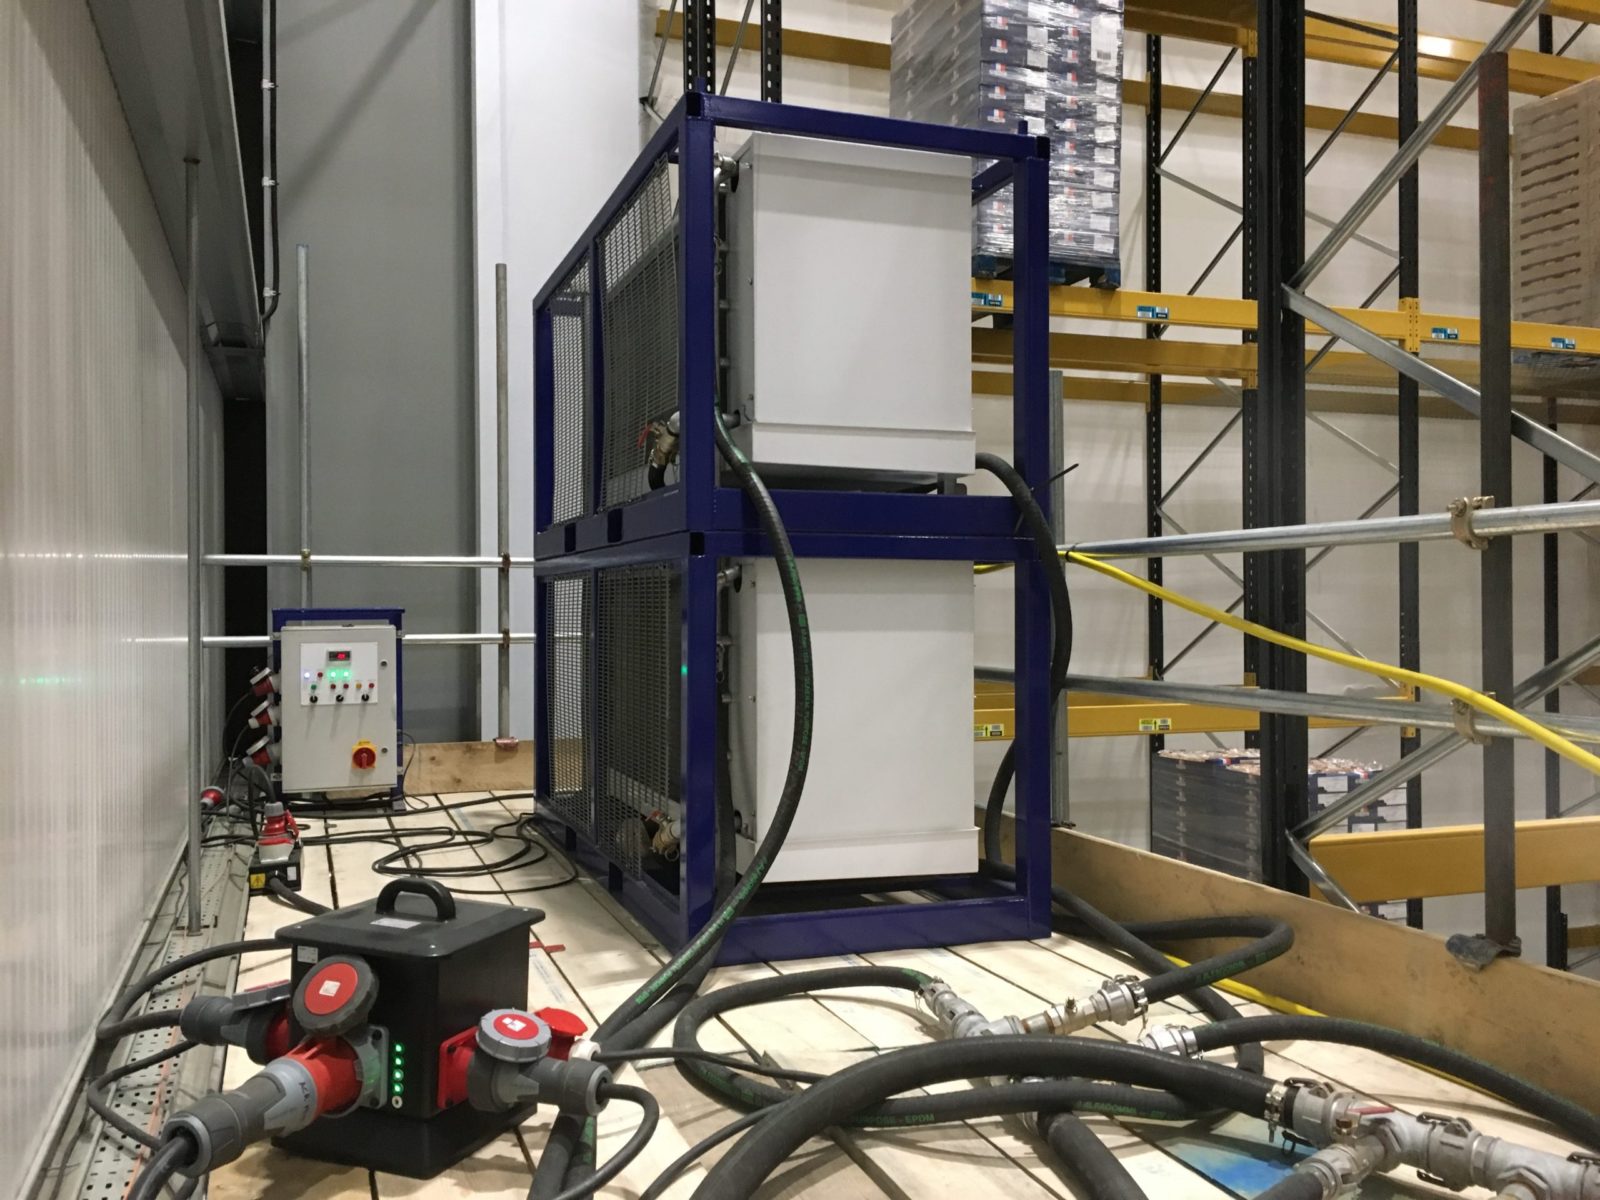 What are AHU’s (Air Handling Units) and What are